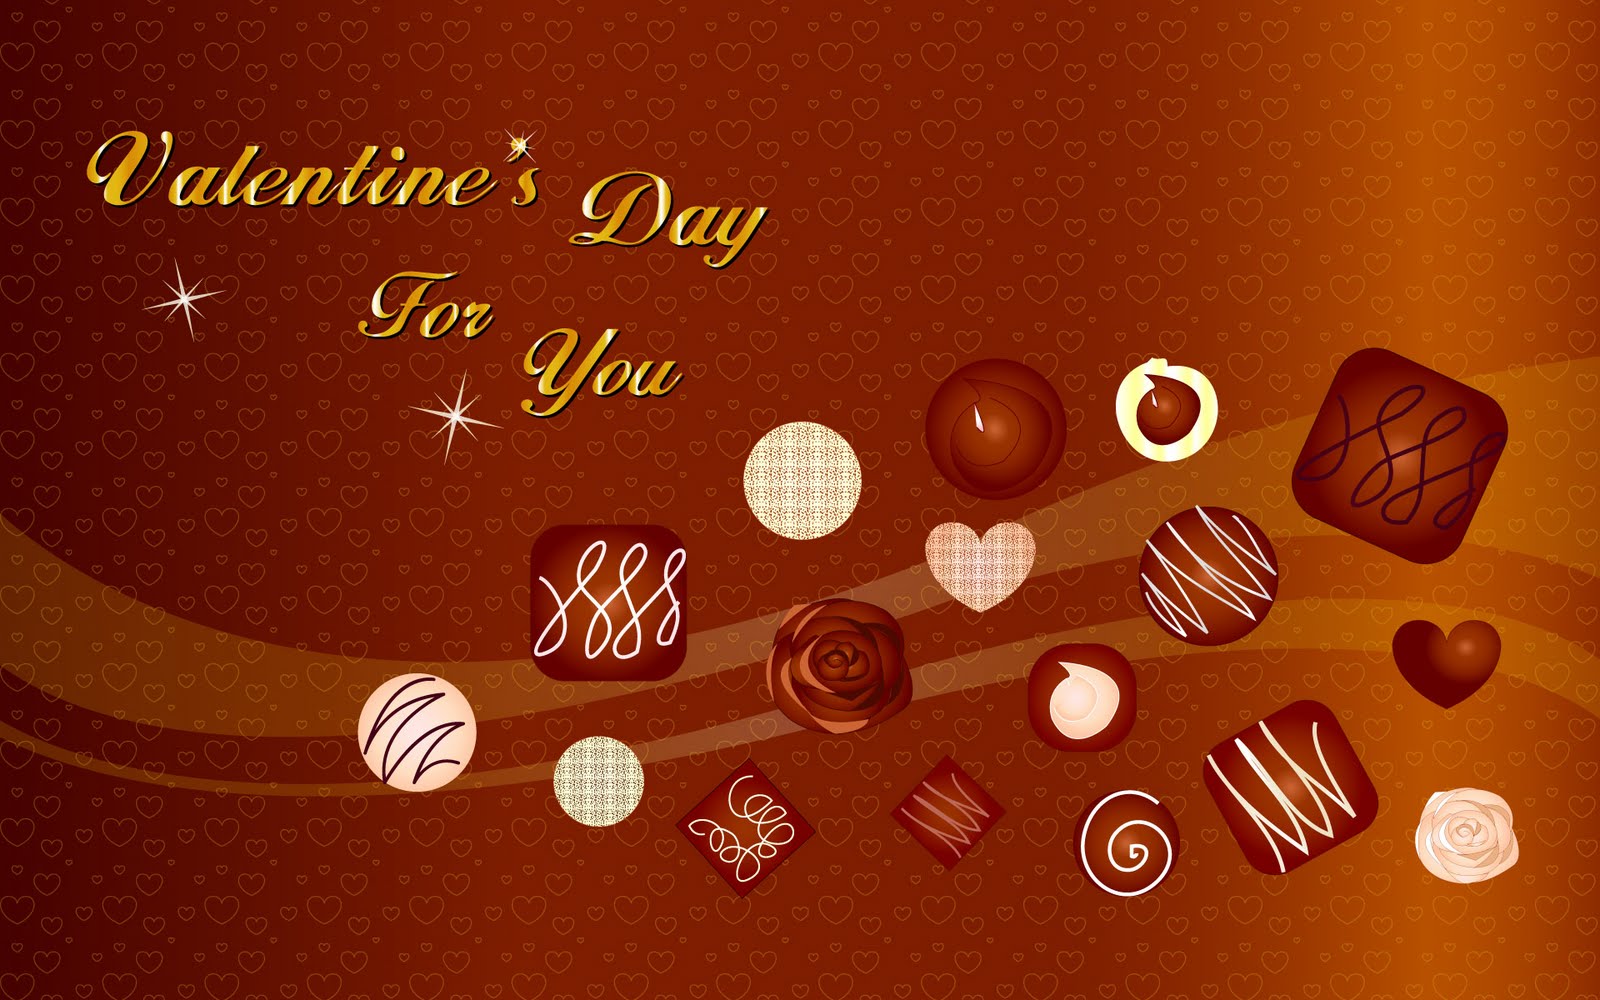 Beautiful Lovers Day Special Free Wallpapers Download | Google ...